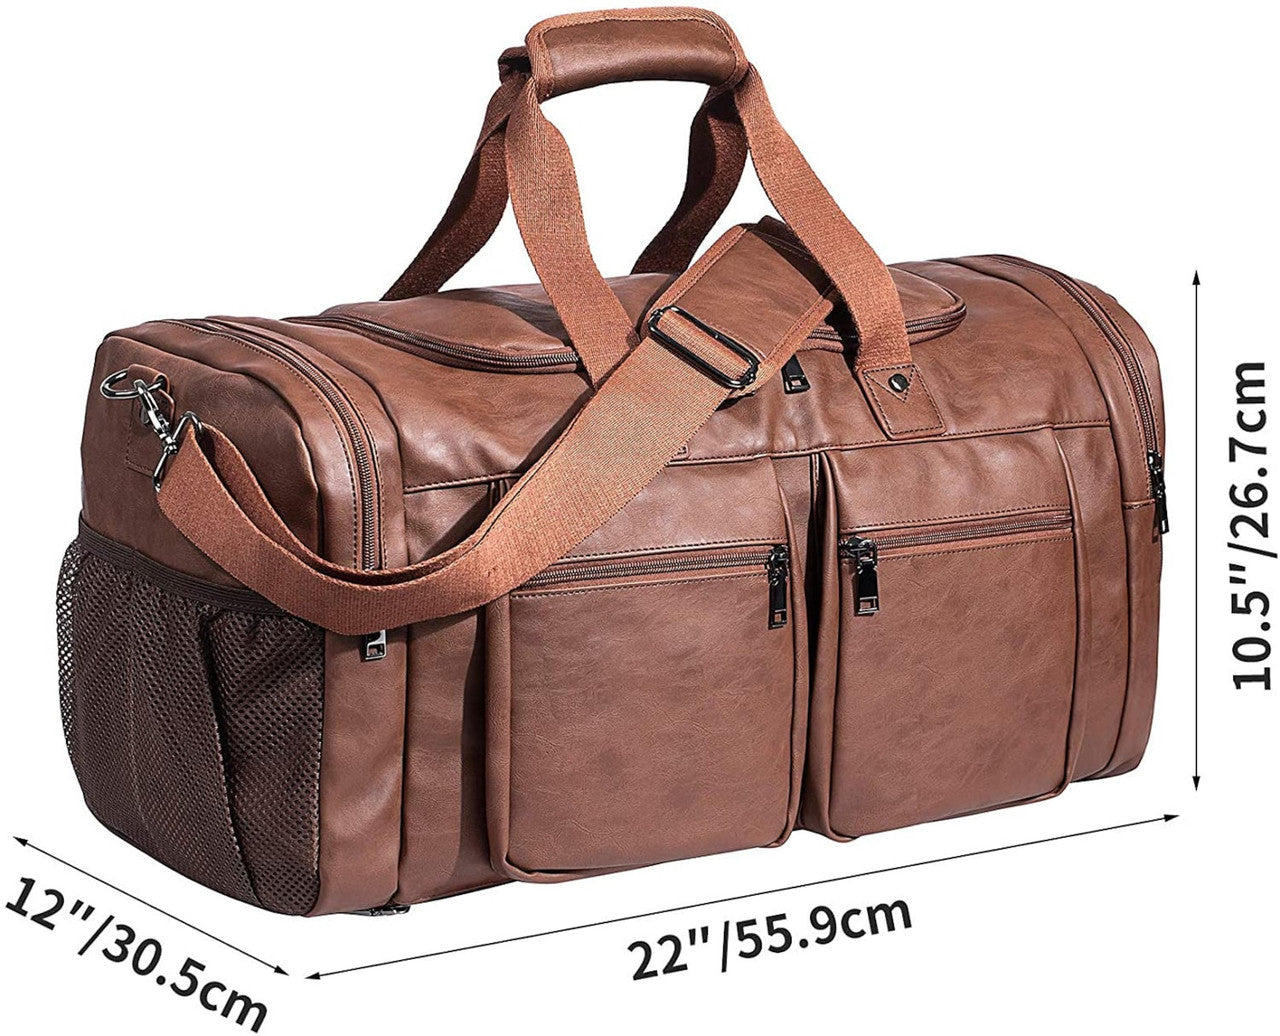 Exotic Brown Genuine Leather Duffle Bag